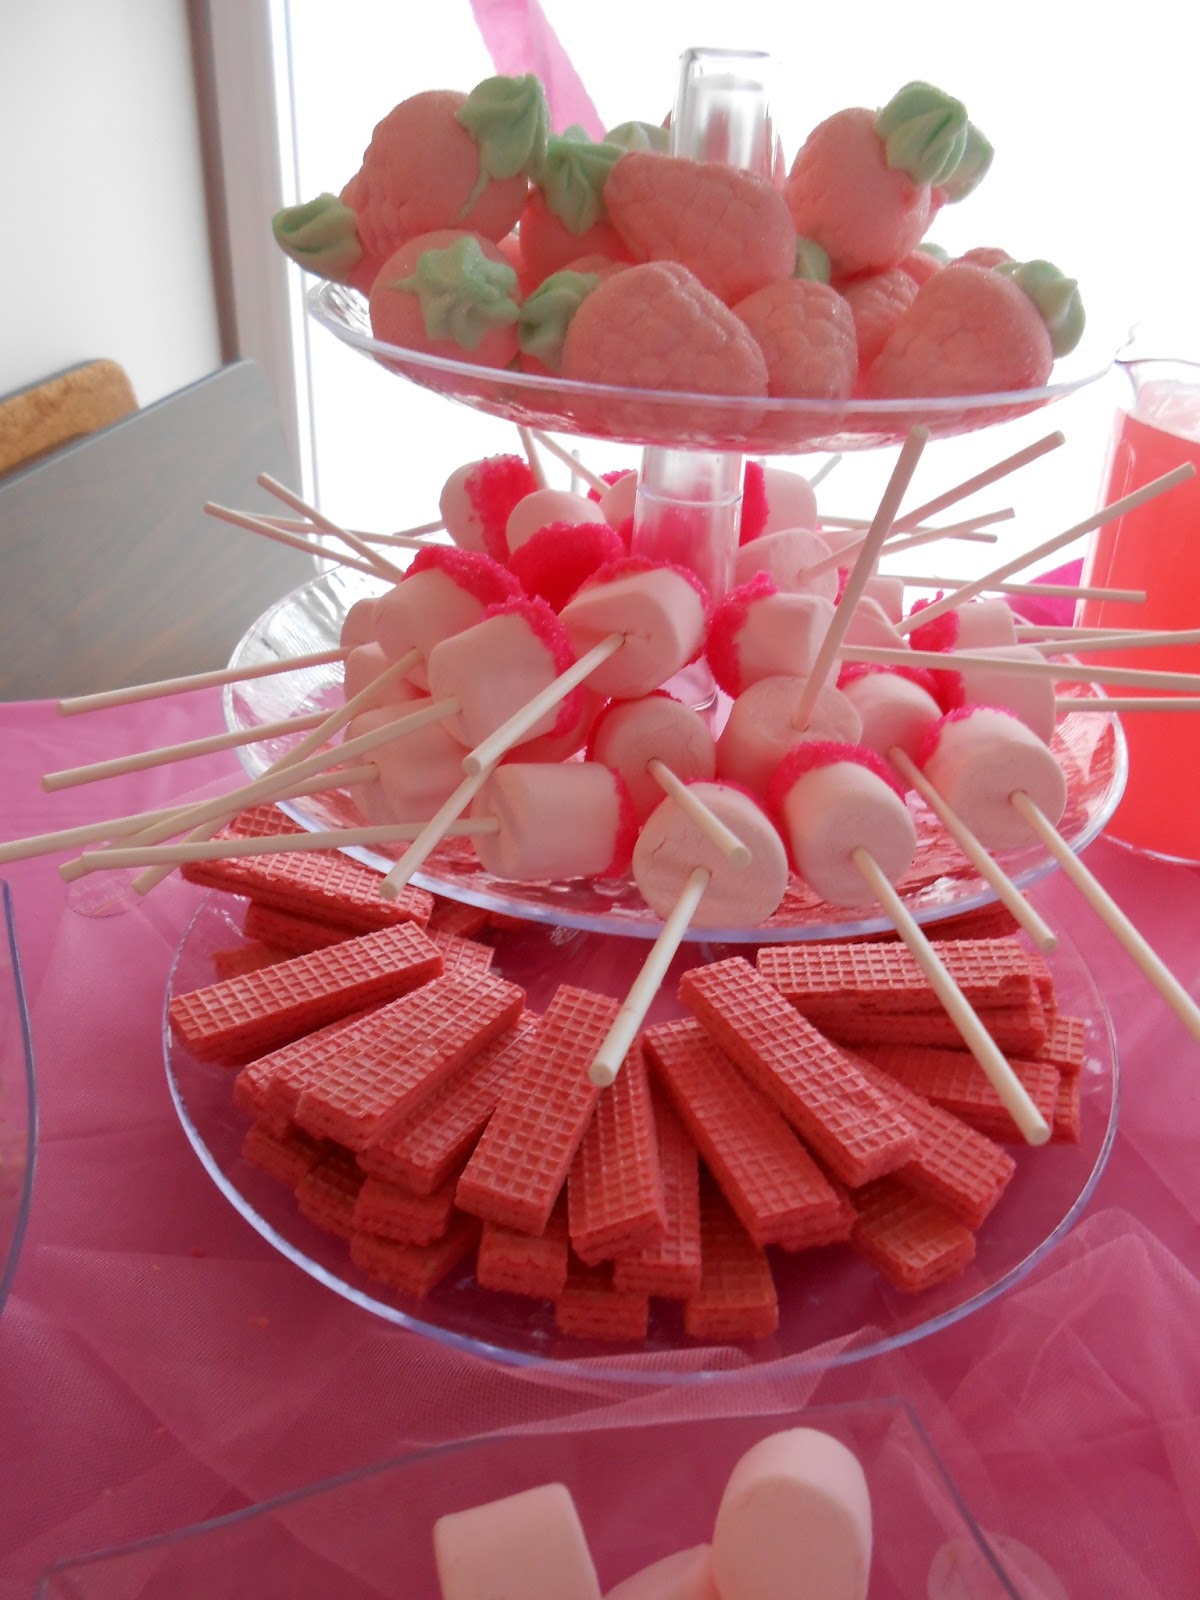 The 24 Best Ideas for Pink Party Food Ideas Home, Family, Style and